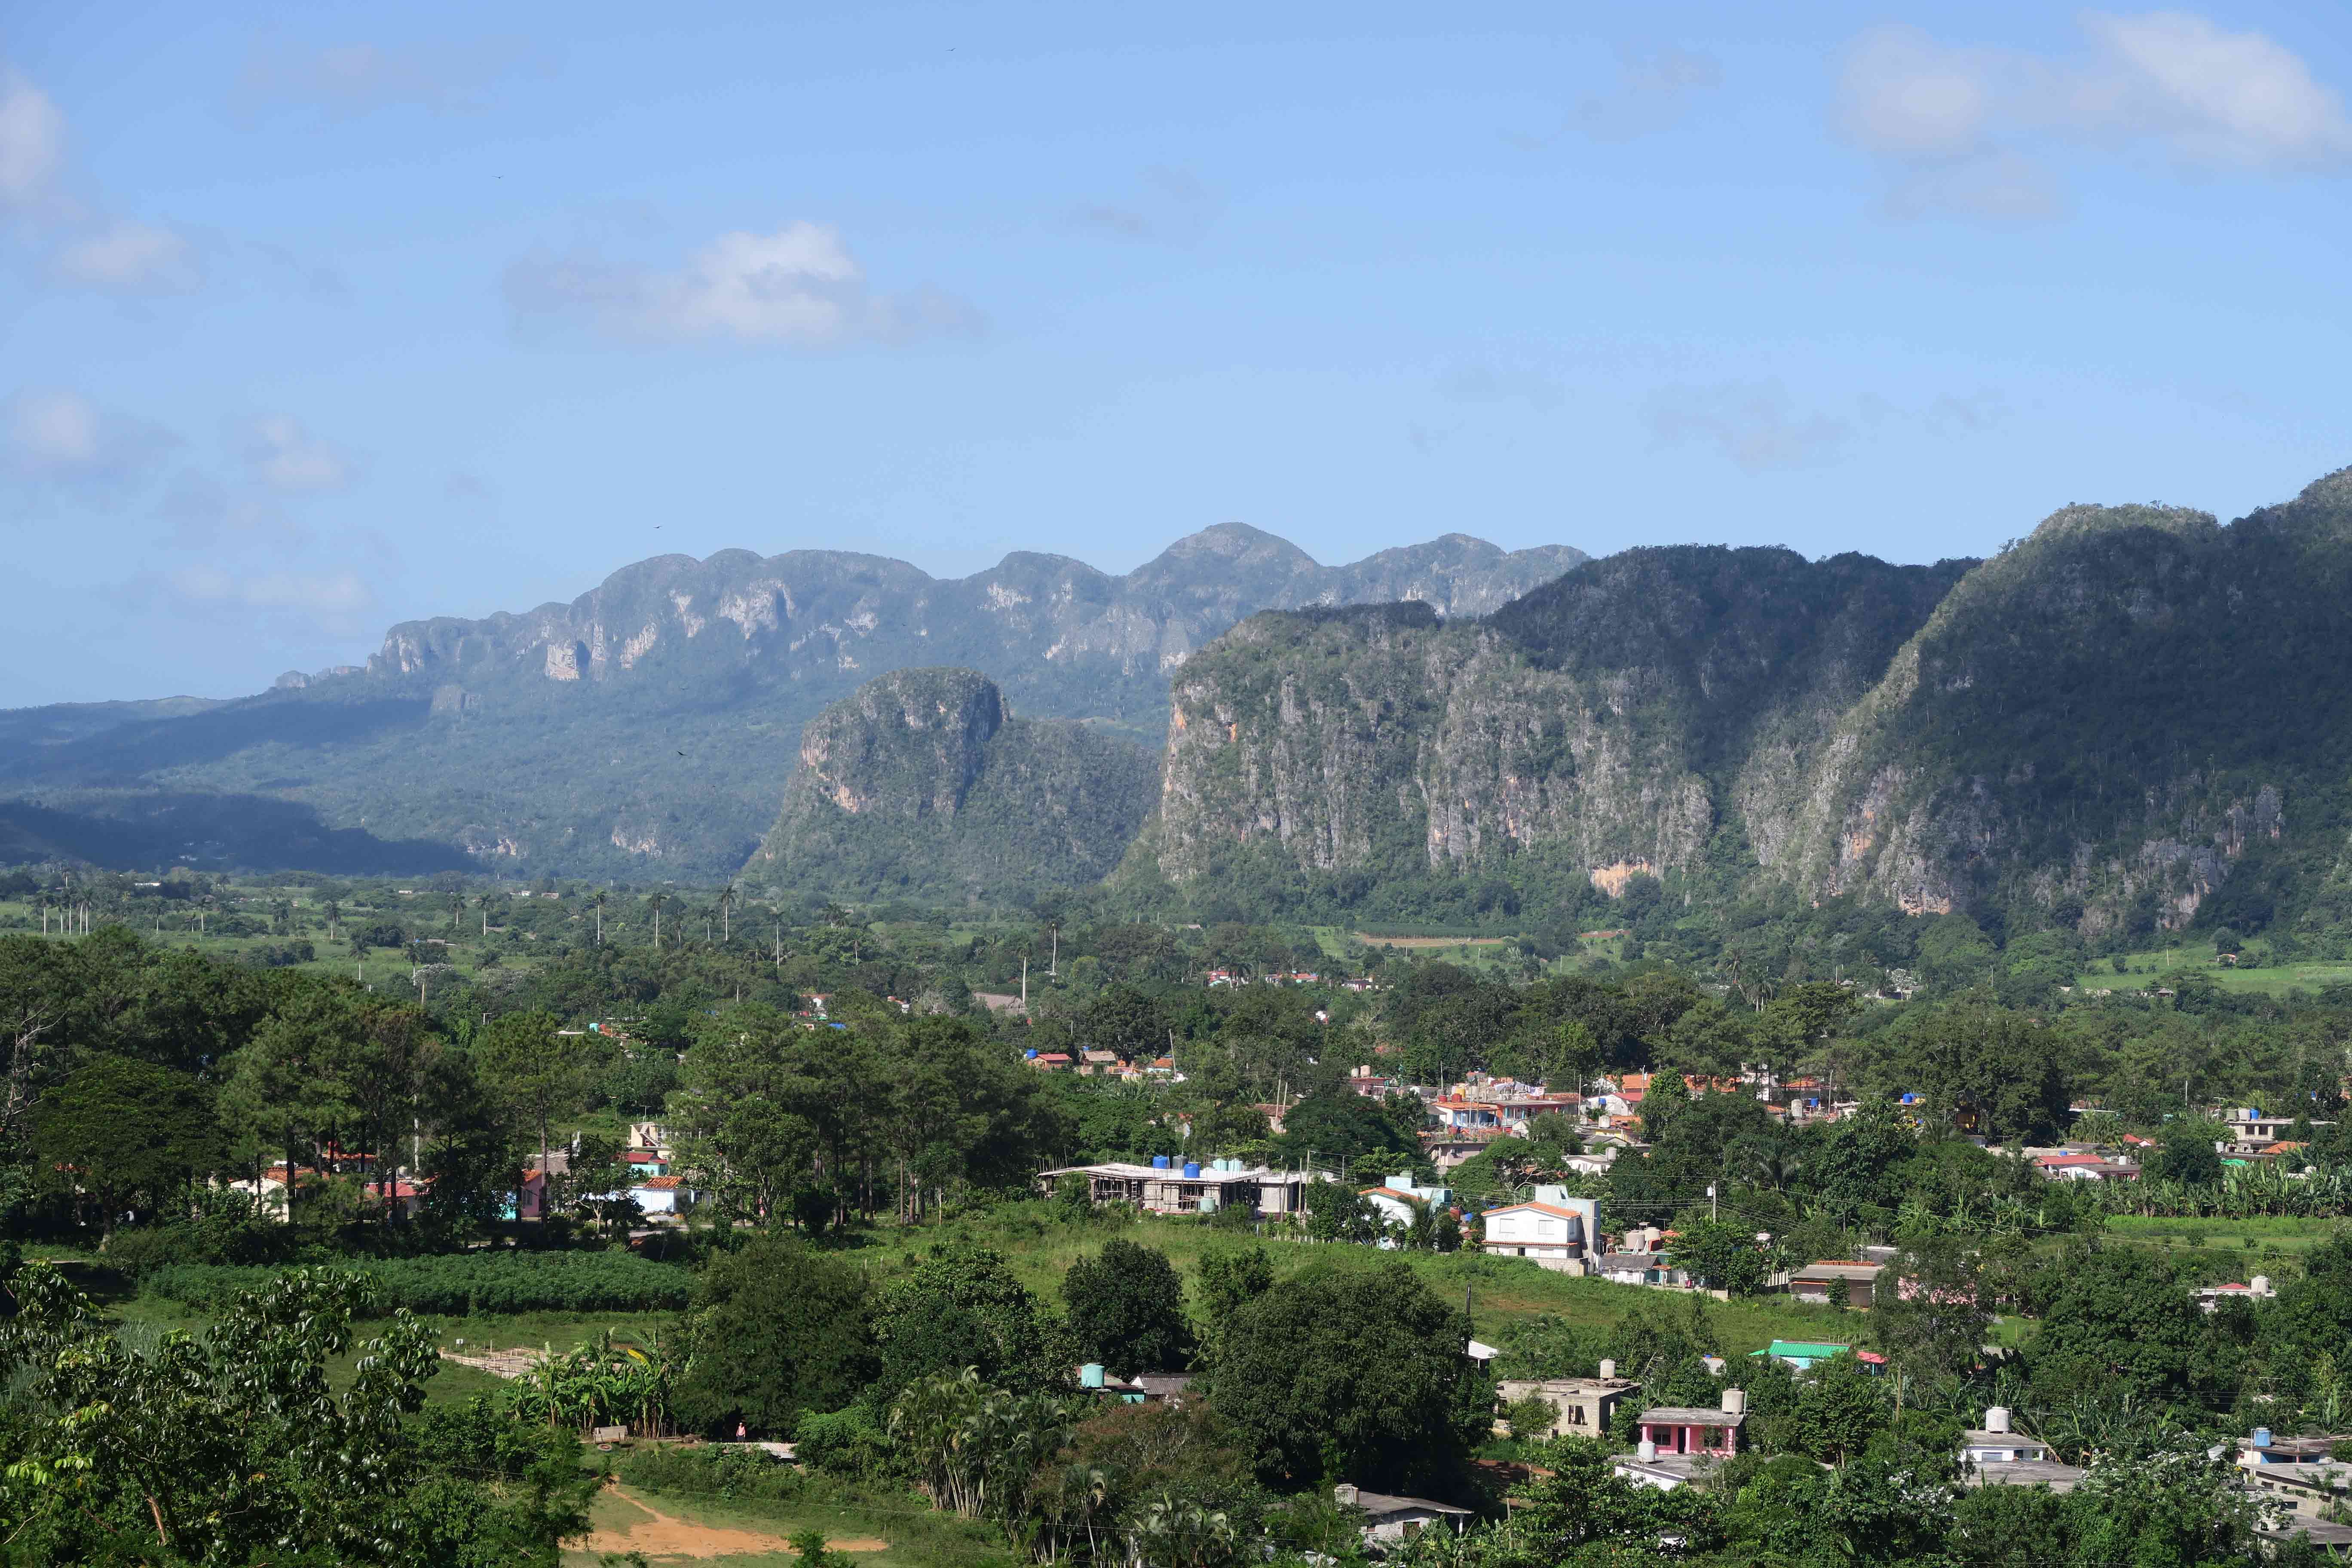 Viñales valley in the Province of Pinar del Rio is known worldwide for the production of the finest cigars and for its typical geological steep hills, the Mogotes. Pinar del Rio, Cuba.